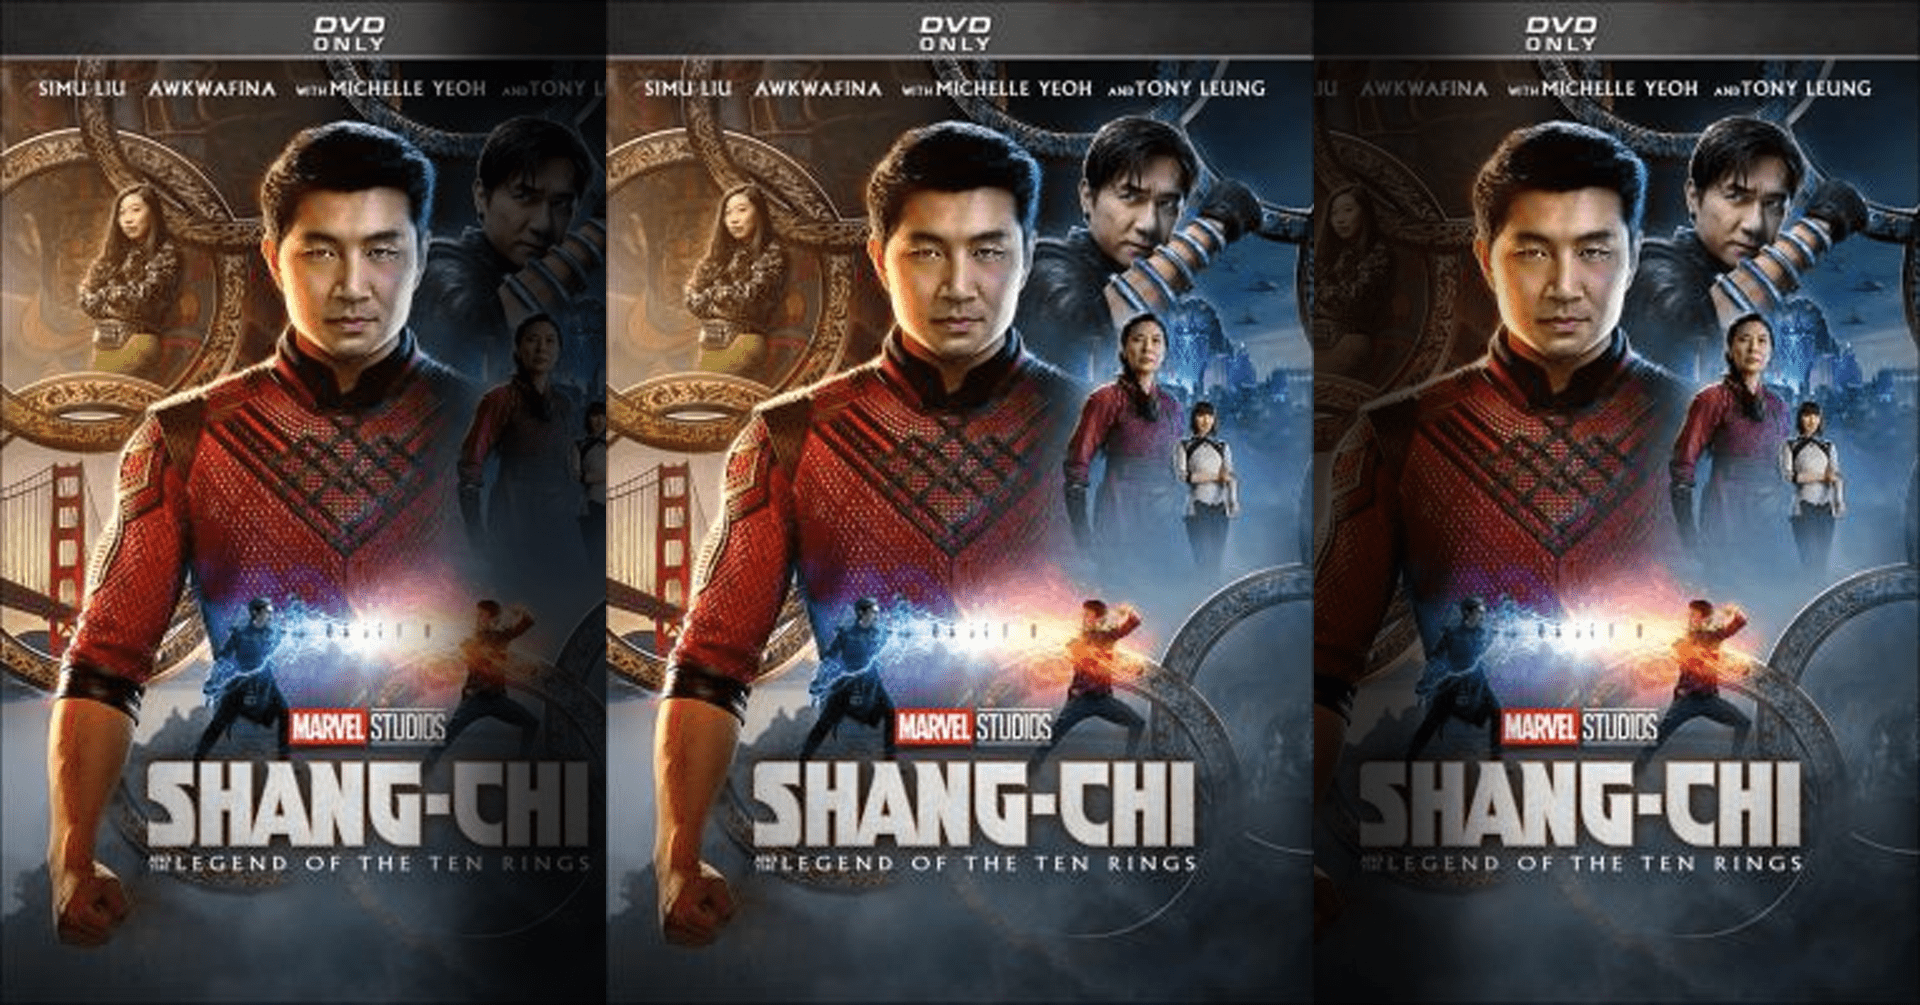 Marvel Studios Shang-Chi and the Legend of the Ten Rings